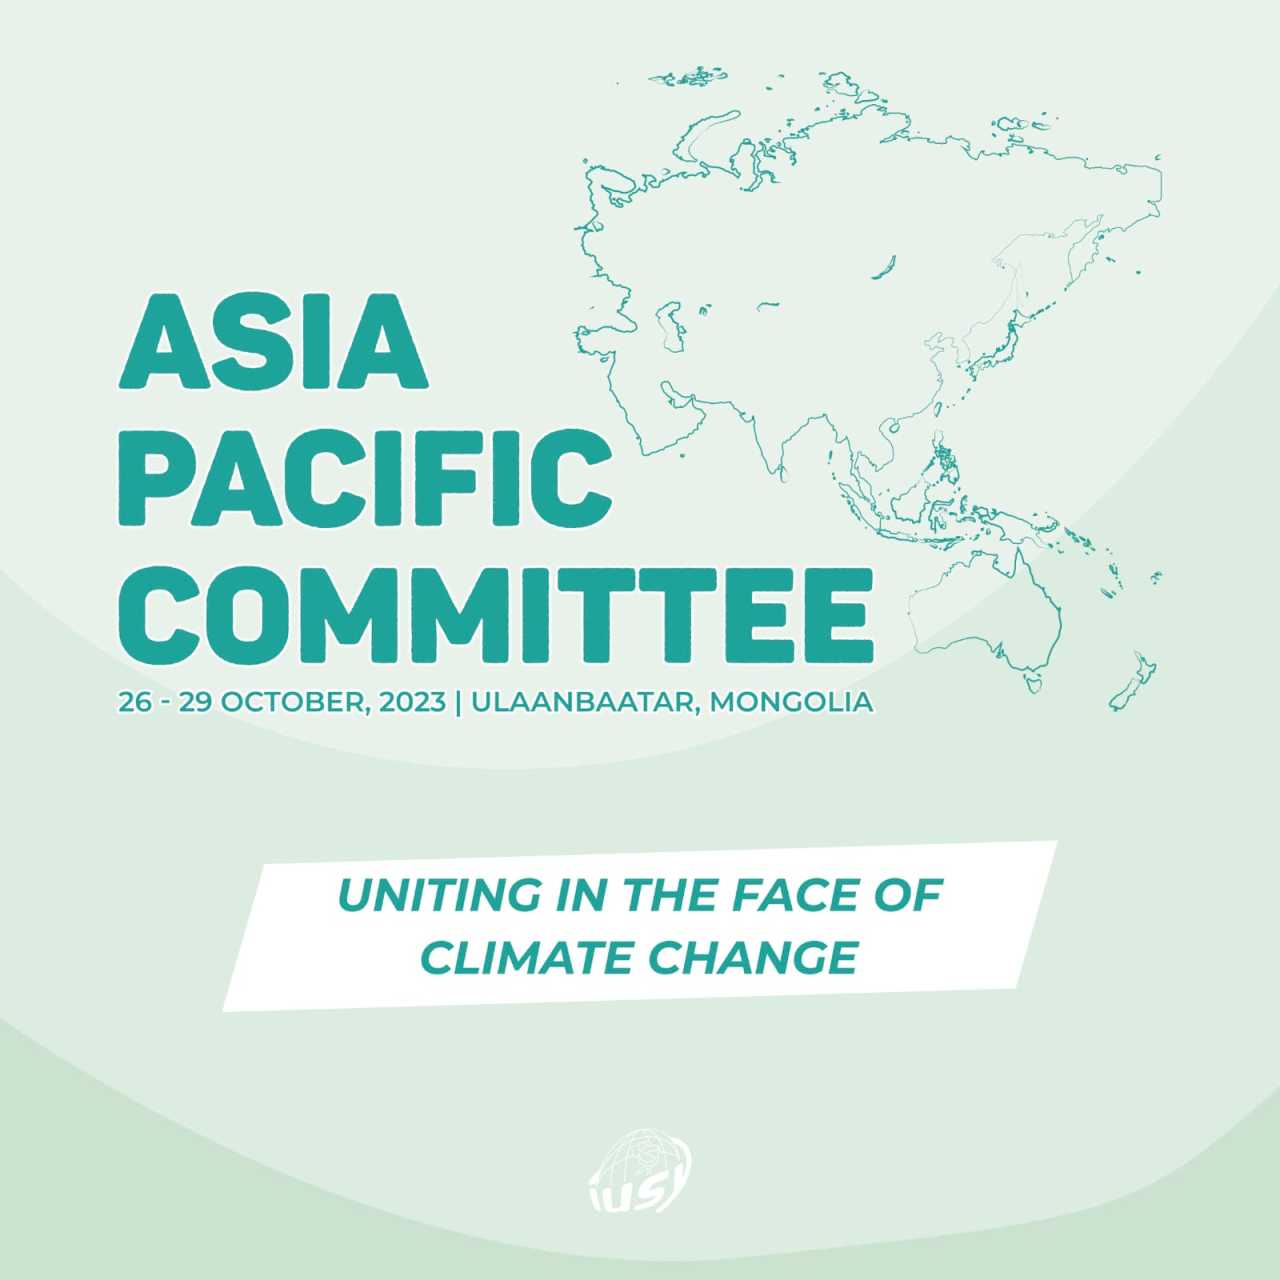 The Ulaanbaatar Statement - Asia Pacific Committee Resolution 2023